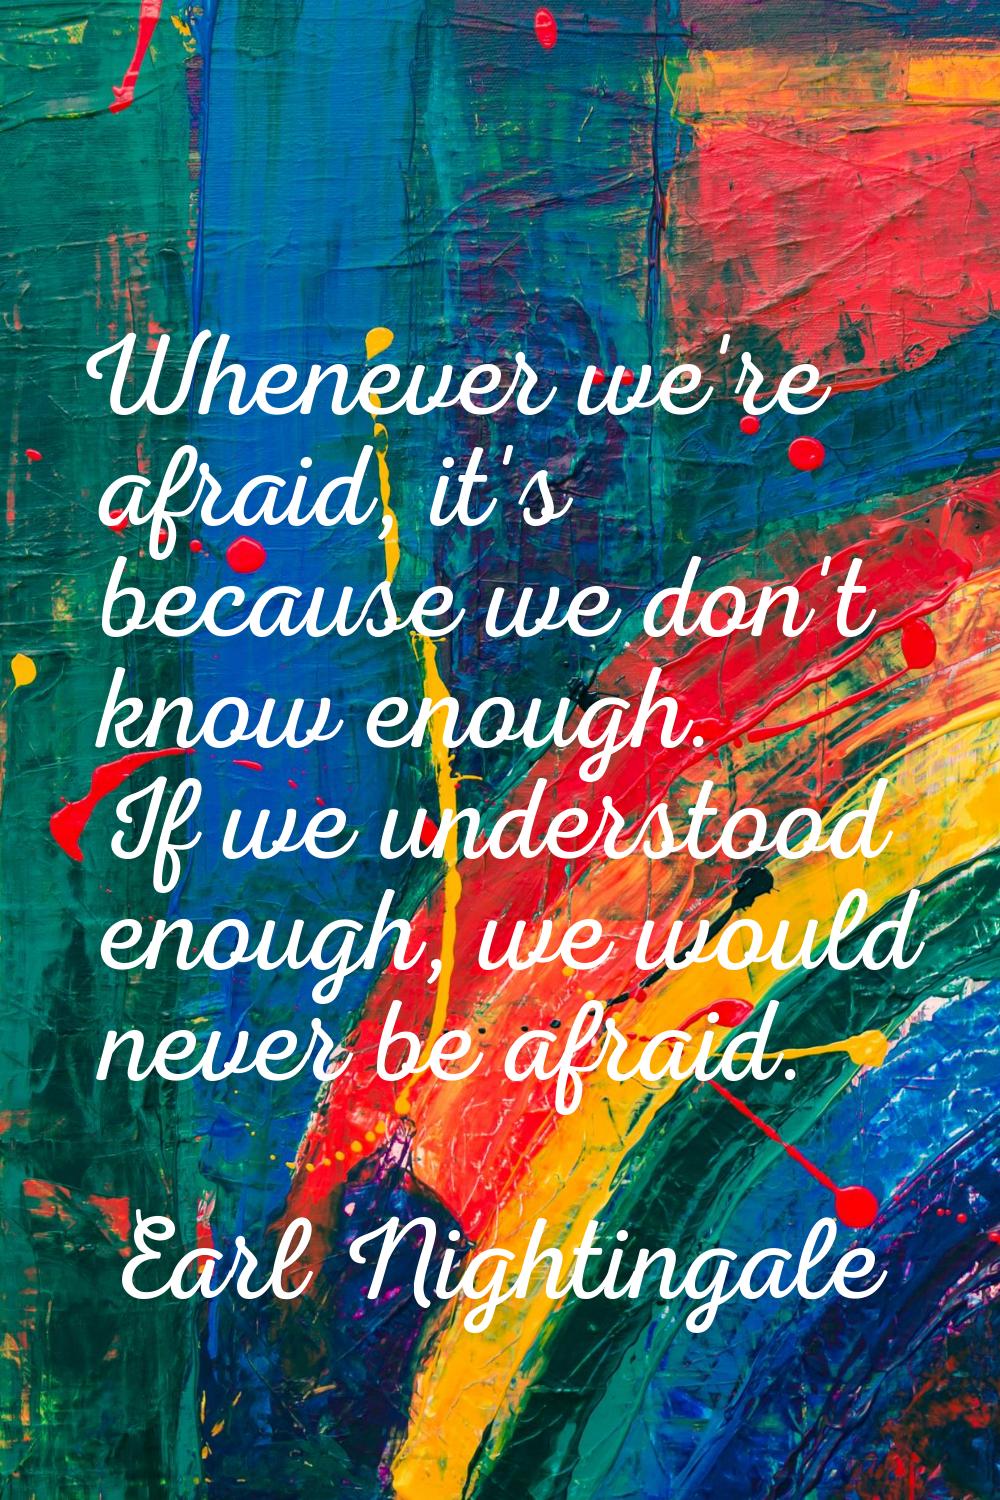 Whenever we're afraid, it's because we don't know enough. If we understood enough, we would never b